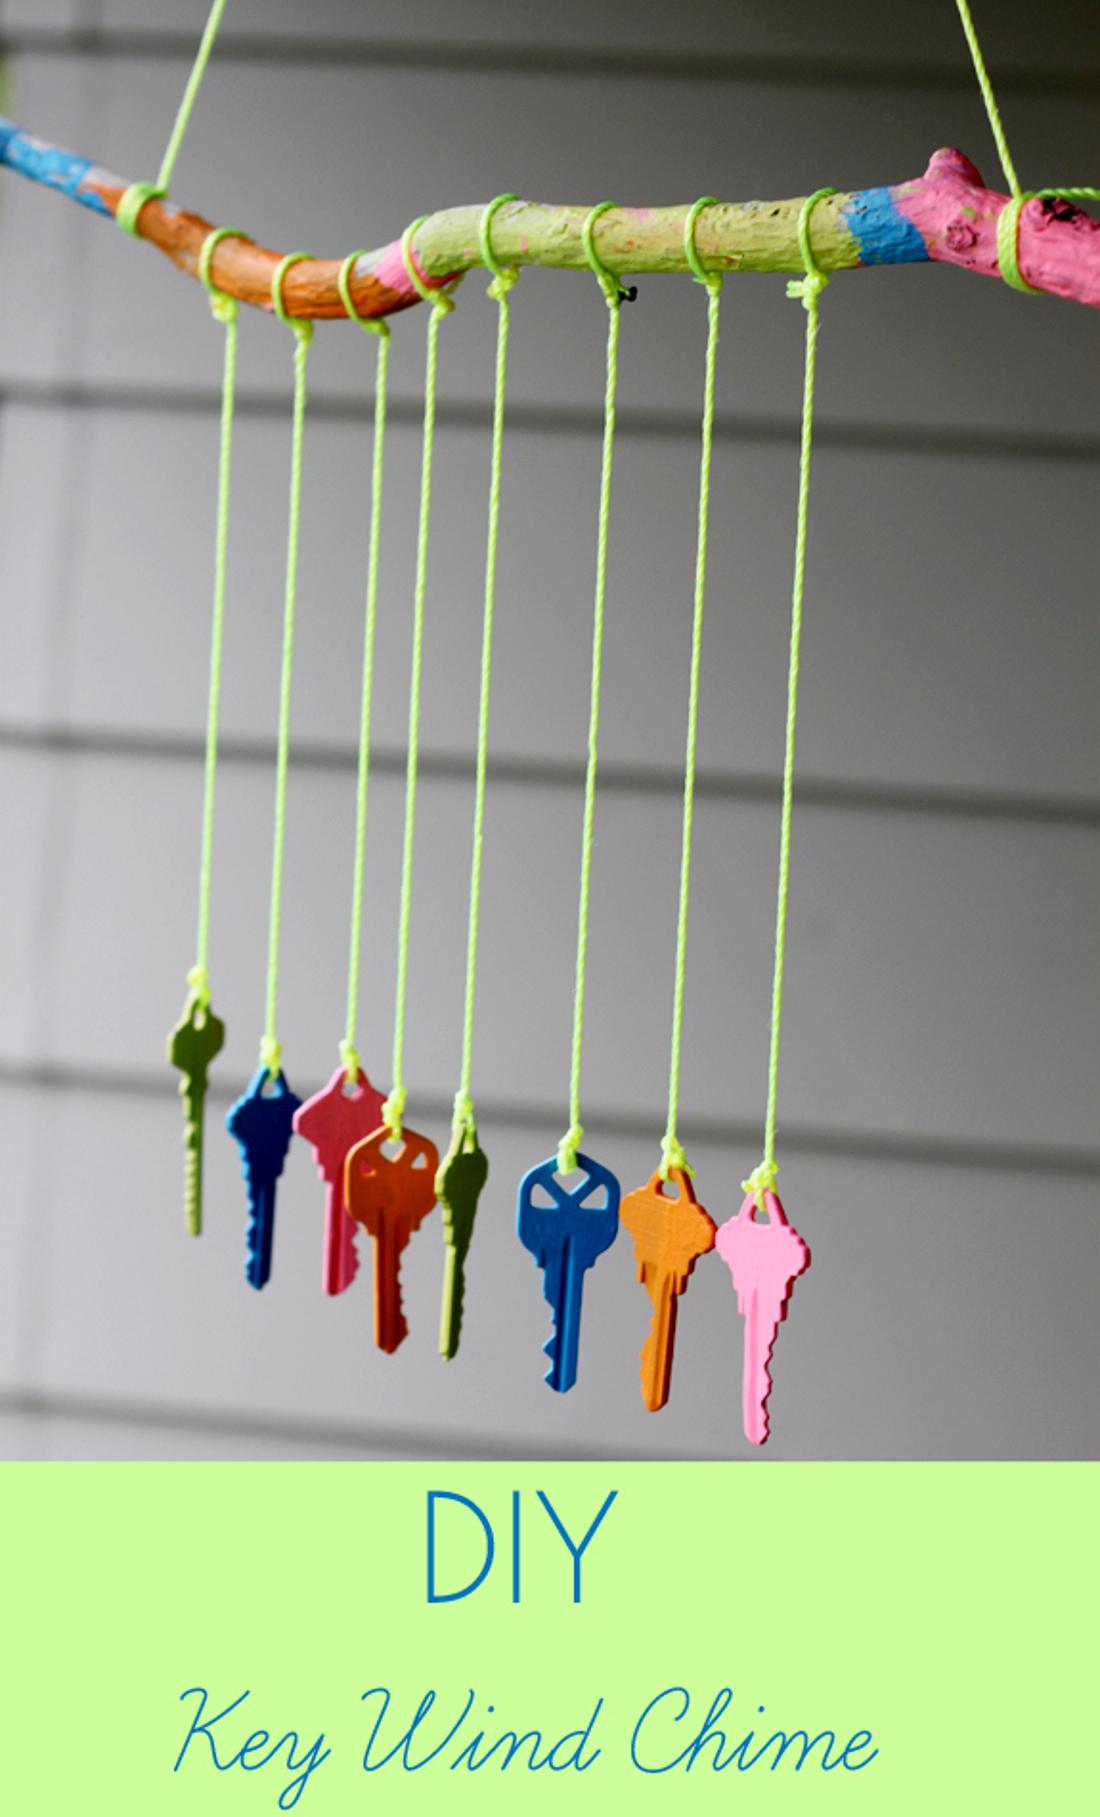 Make a wind chime out of old keys and acrylic paint.